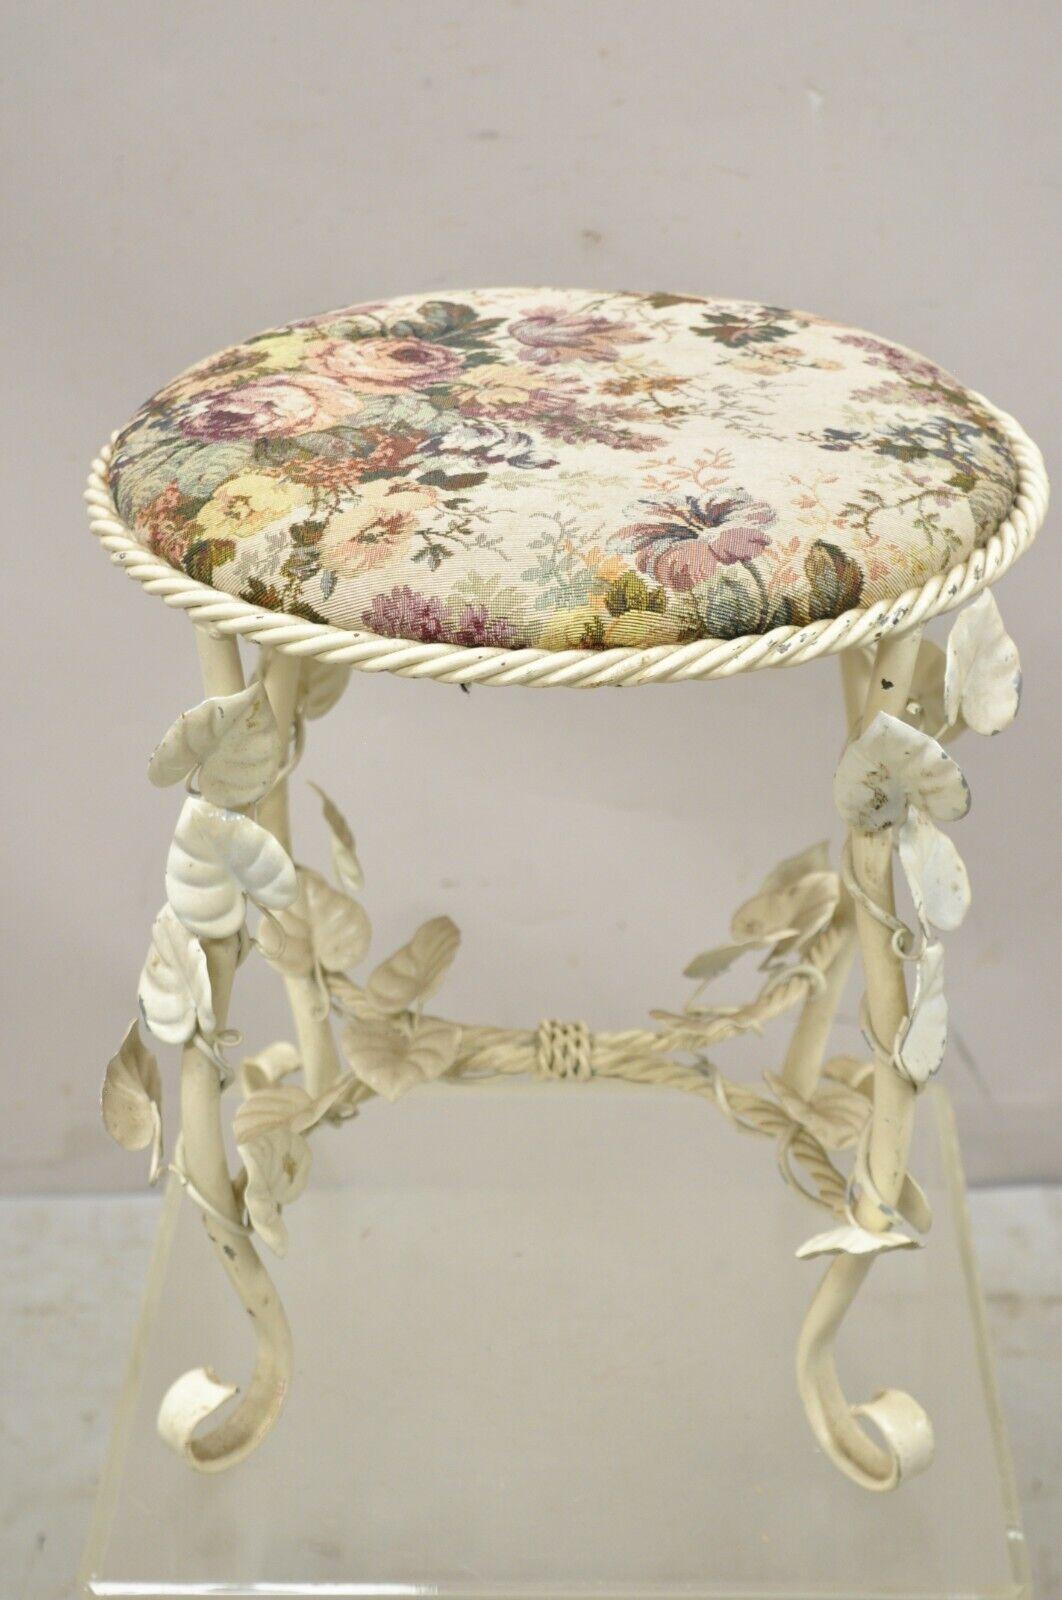 Vintage Italian Hollywood Regency Metal Floral White Rope Form Vintage Bench Stool. Item features Rope form metal frame, floral accents, stretcher base, upholstered round seat, very nice vintage item, great style and form, circa Mid to Late 20th